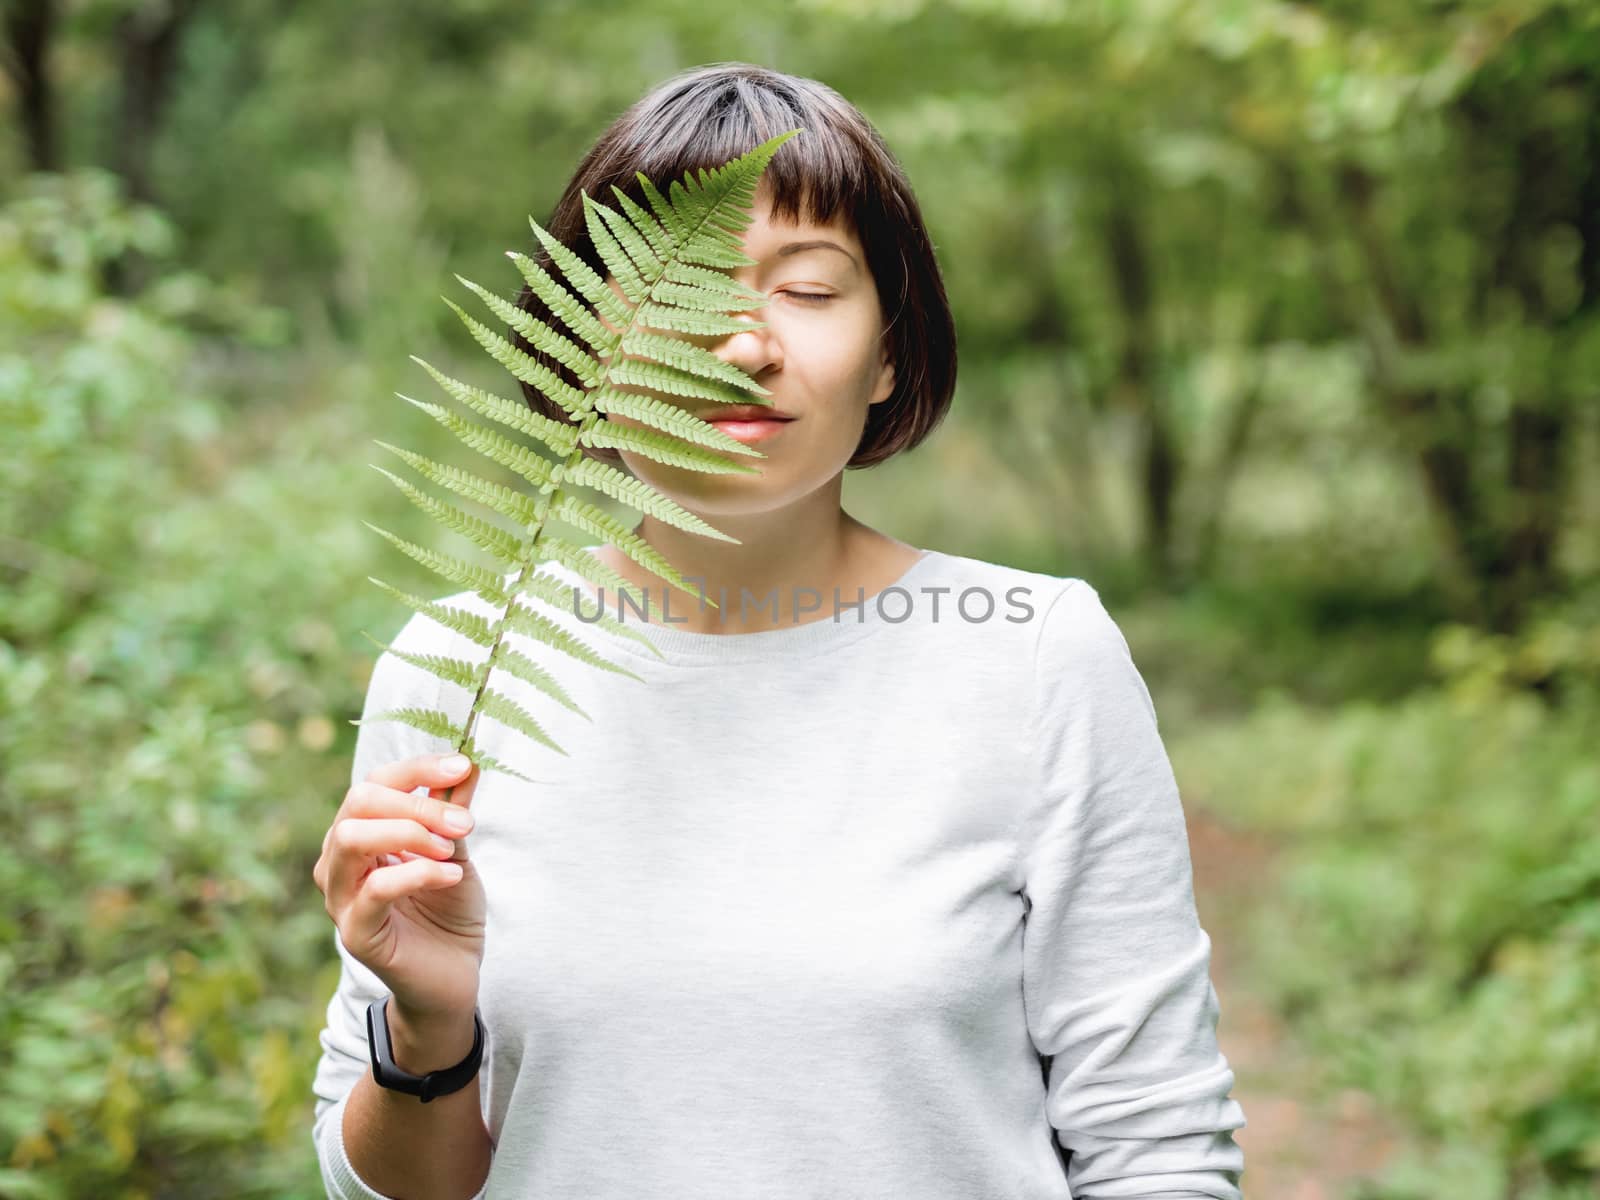 Young woman is hiding her eye with fern leaf. Symbol of life, tranquility and unity with nature. Summer in forest.